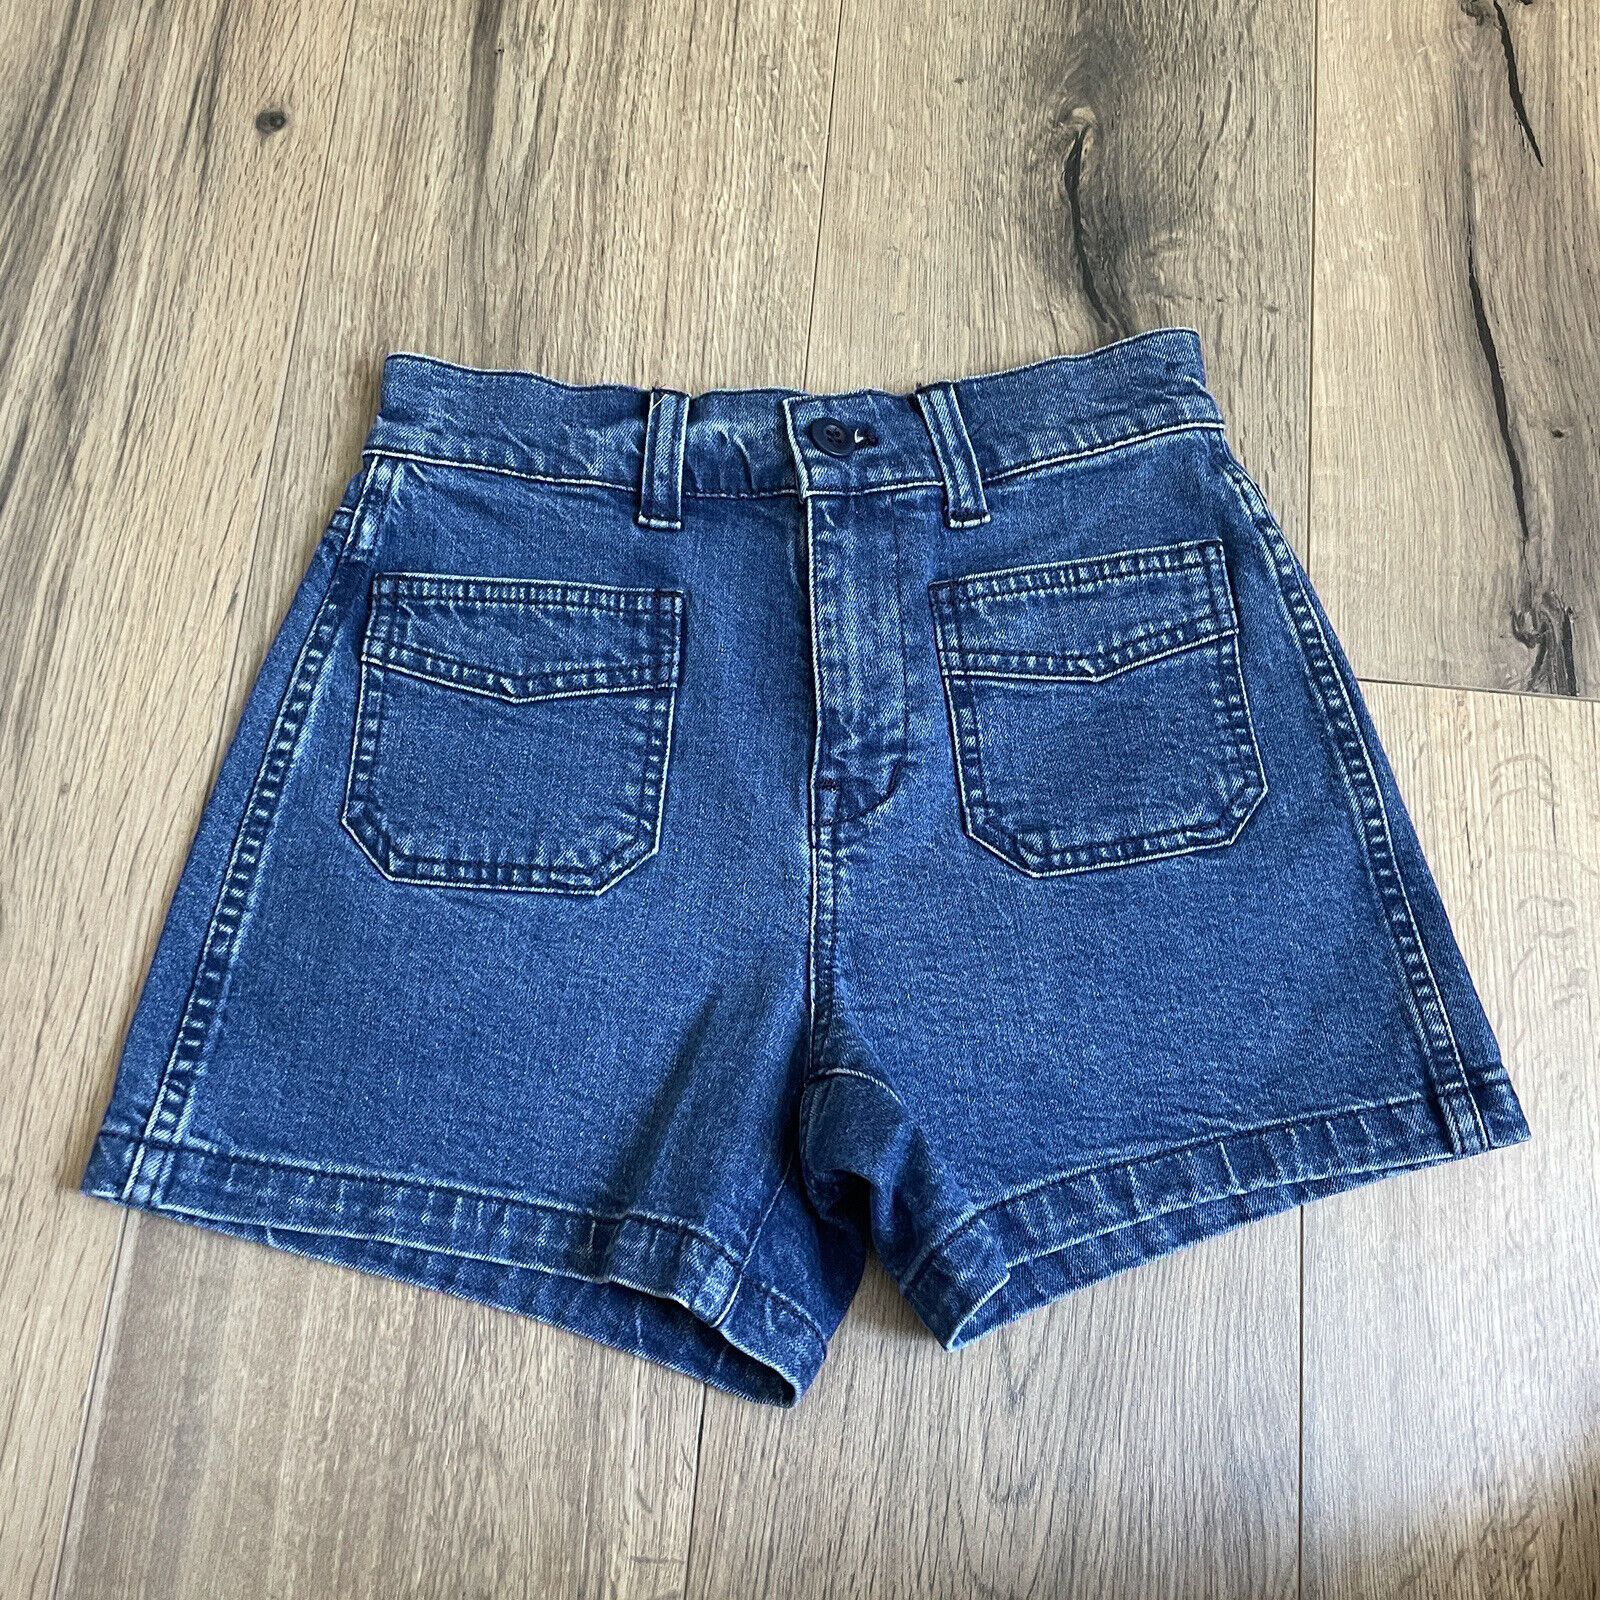 Animer and price revision NEW Madewell Size Popular popular 23 High Rise Stretch Patch Shorts Denim Pocket